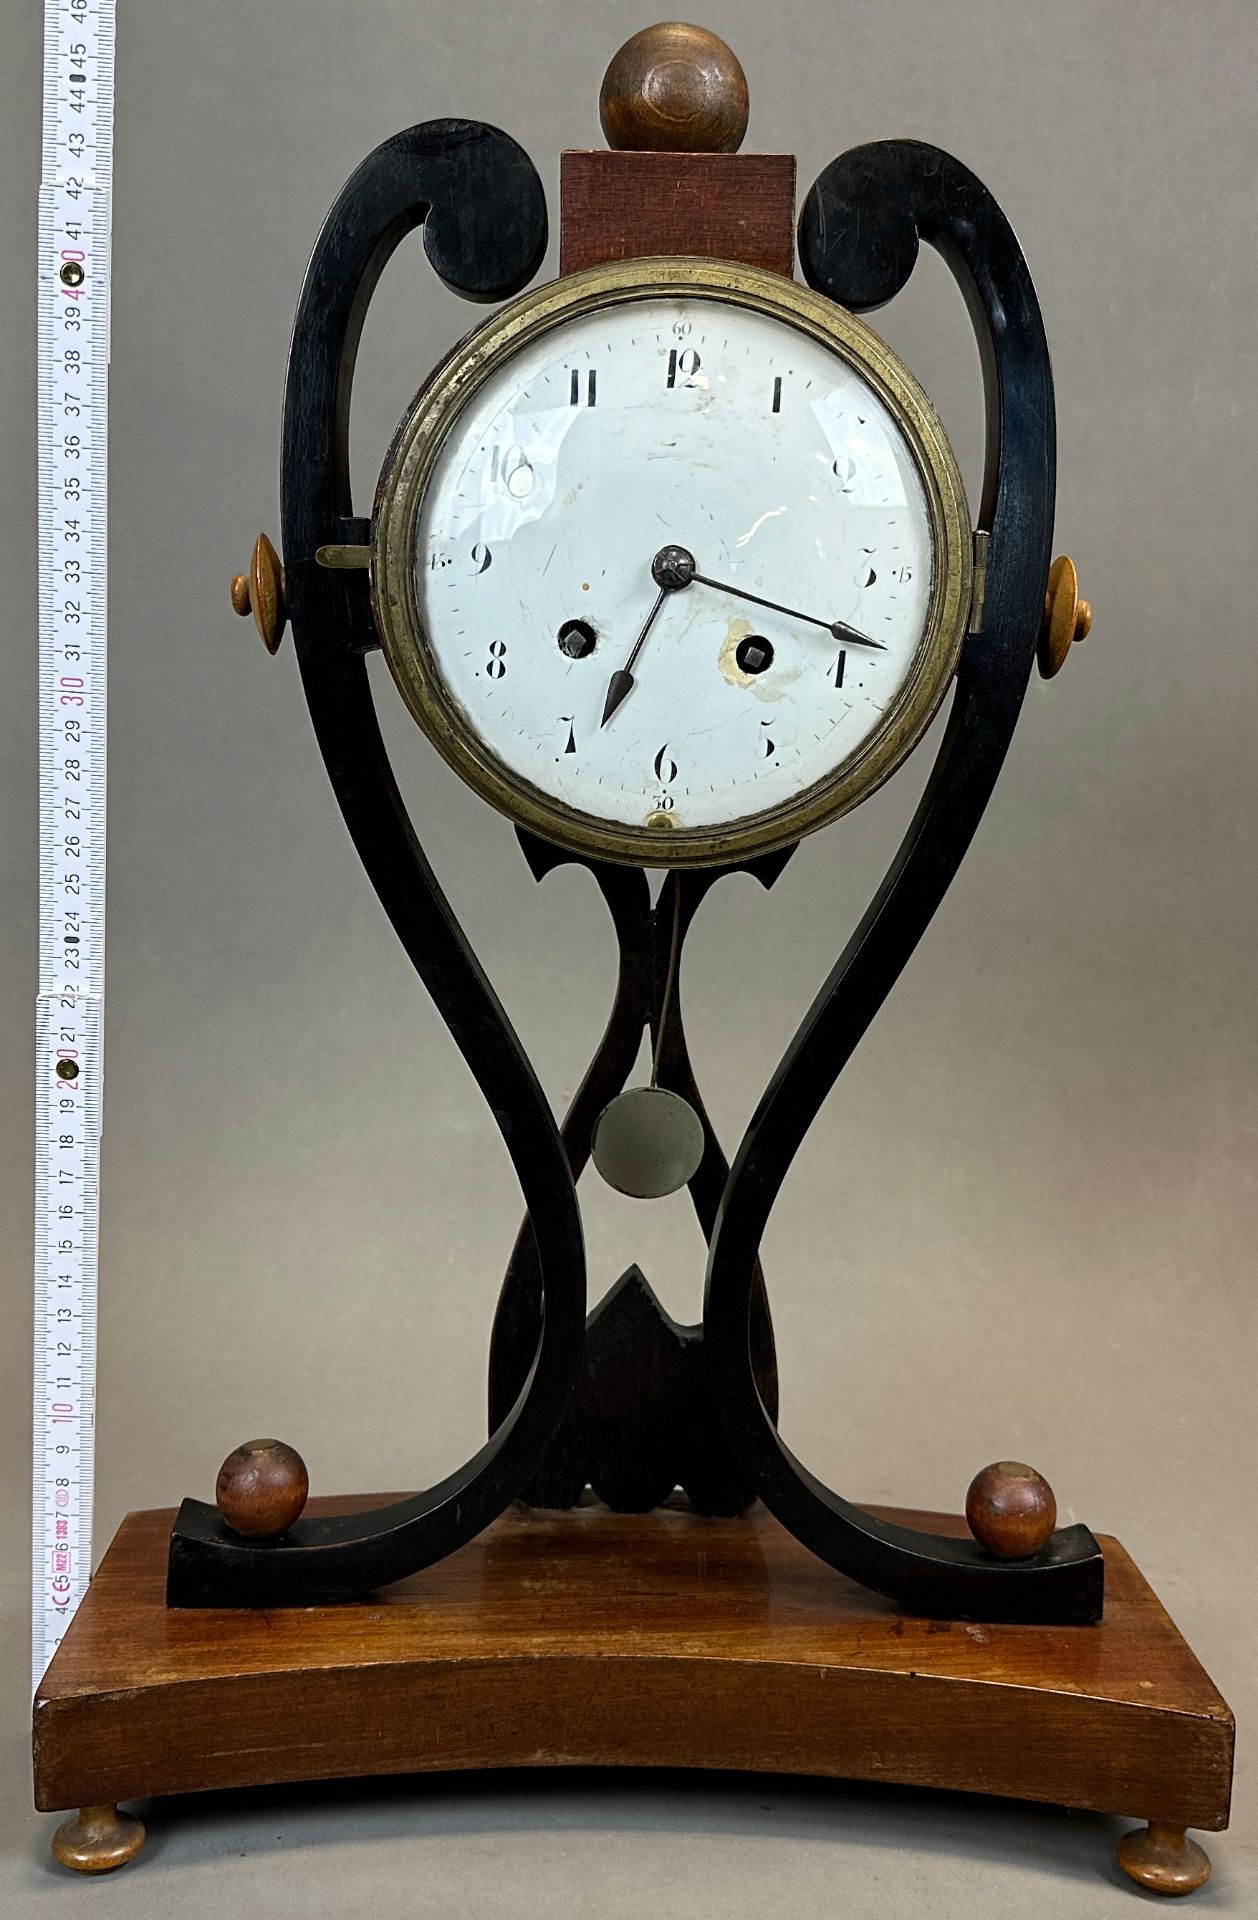 Antique mantel clock with striking mechanism and enamelled dial. 1st half of the 19th century. - Image 10 of 11